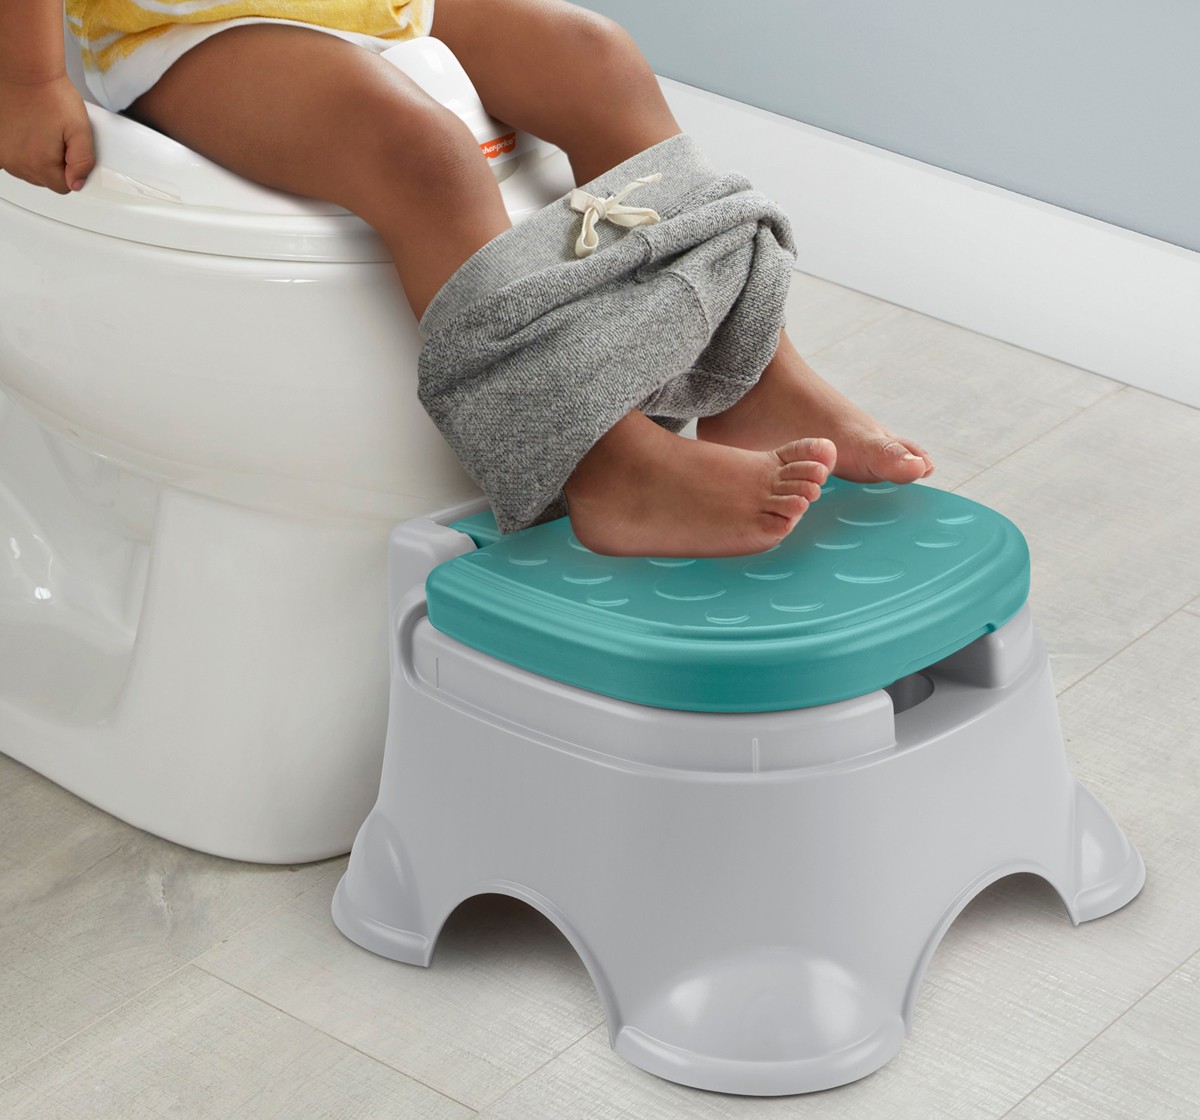 Fisher Price 3 In 1 Potty,  12Y+ (Multicolor)